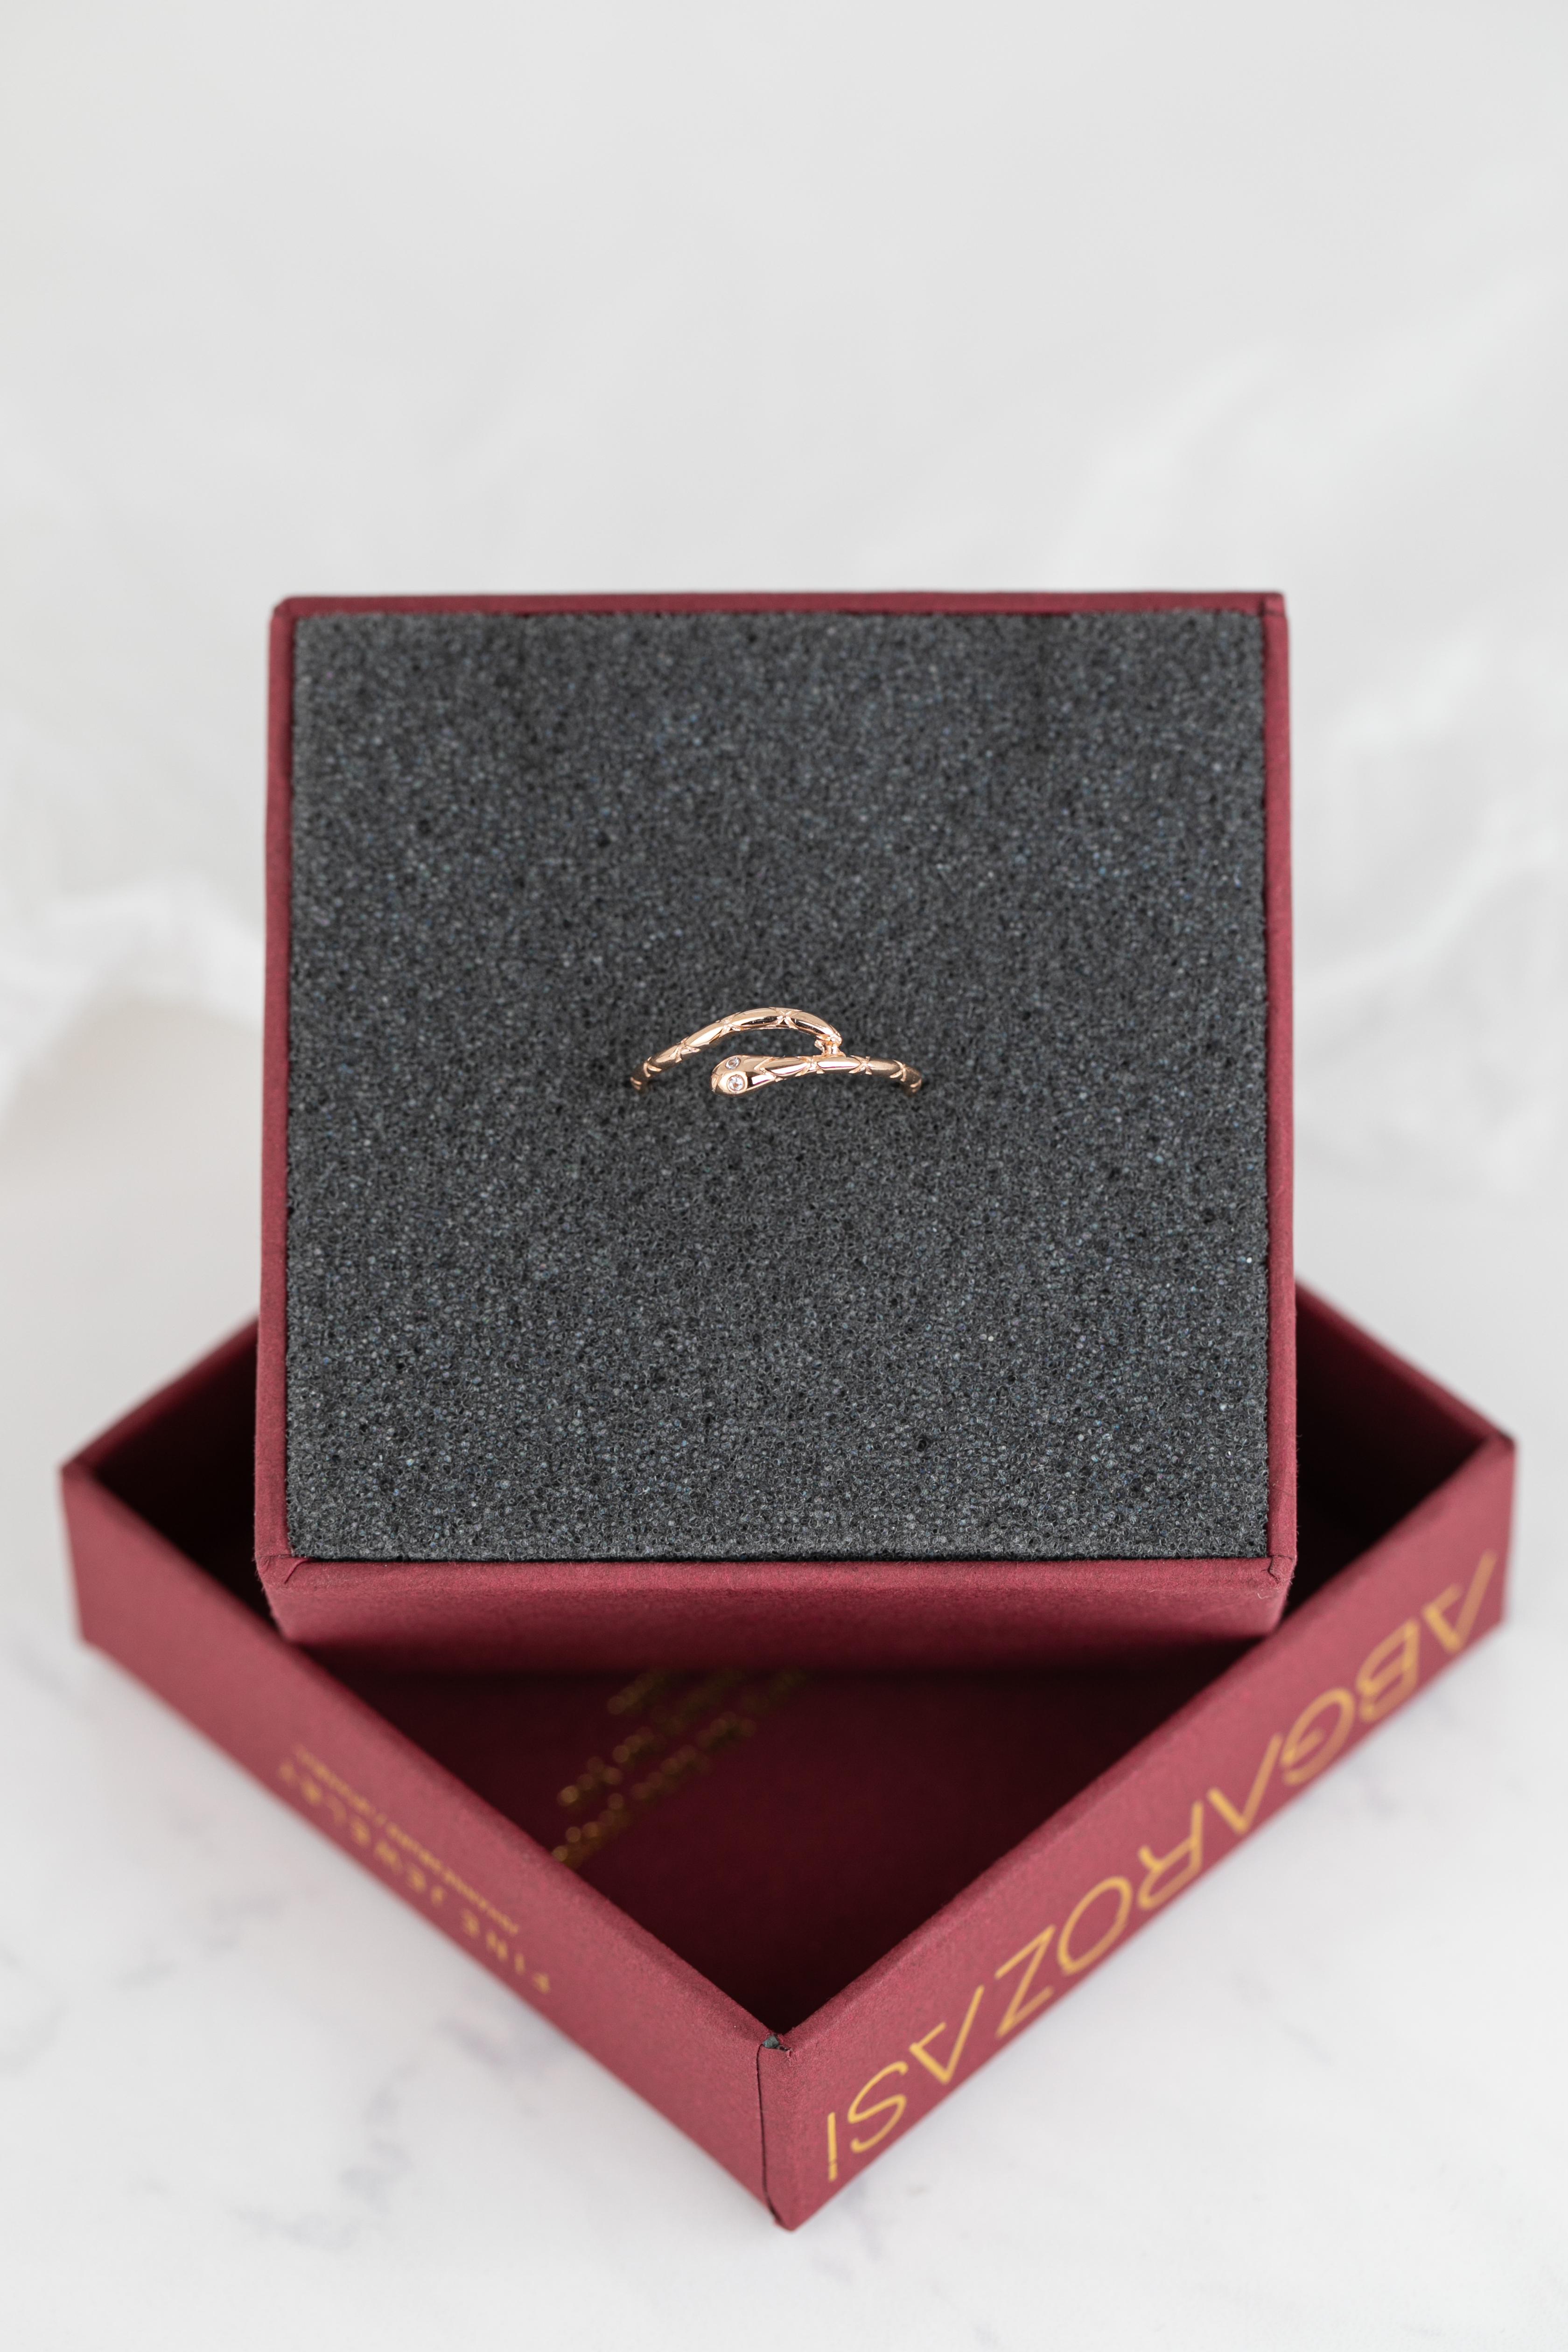 For Sale:  14k Gold Snake Ring, Serpent Shape Pinky, Stackable Ring with Moissanite 5